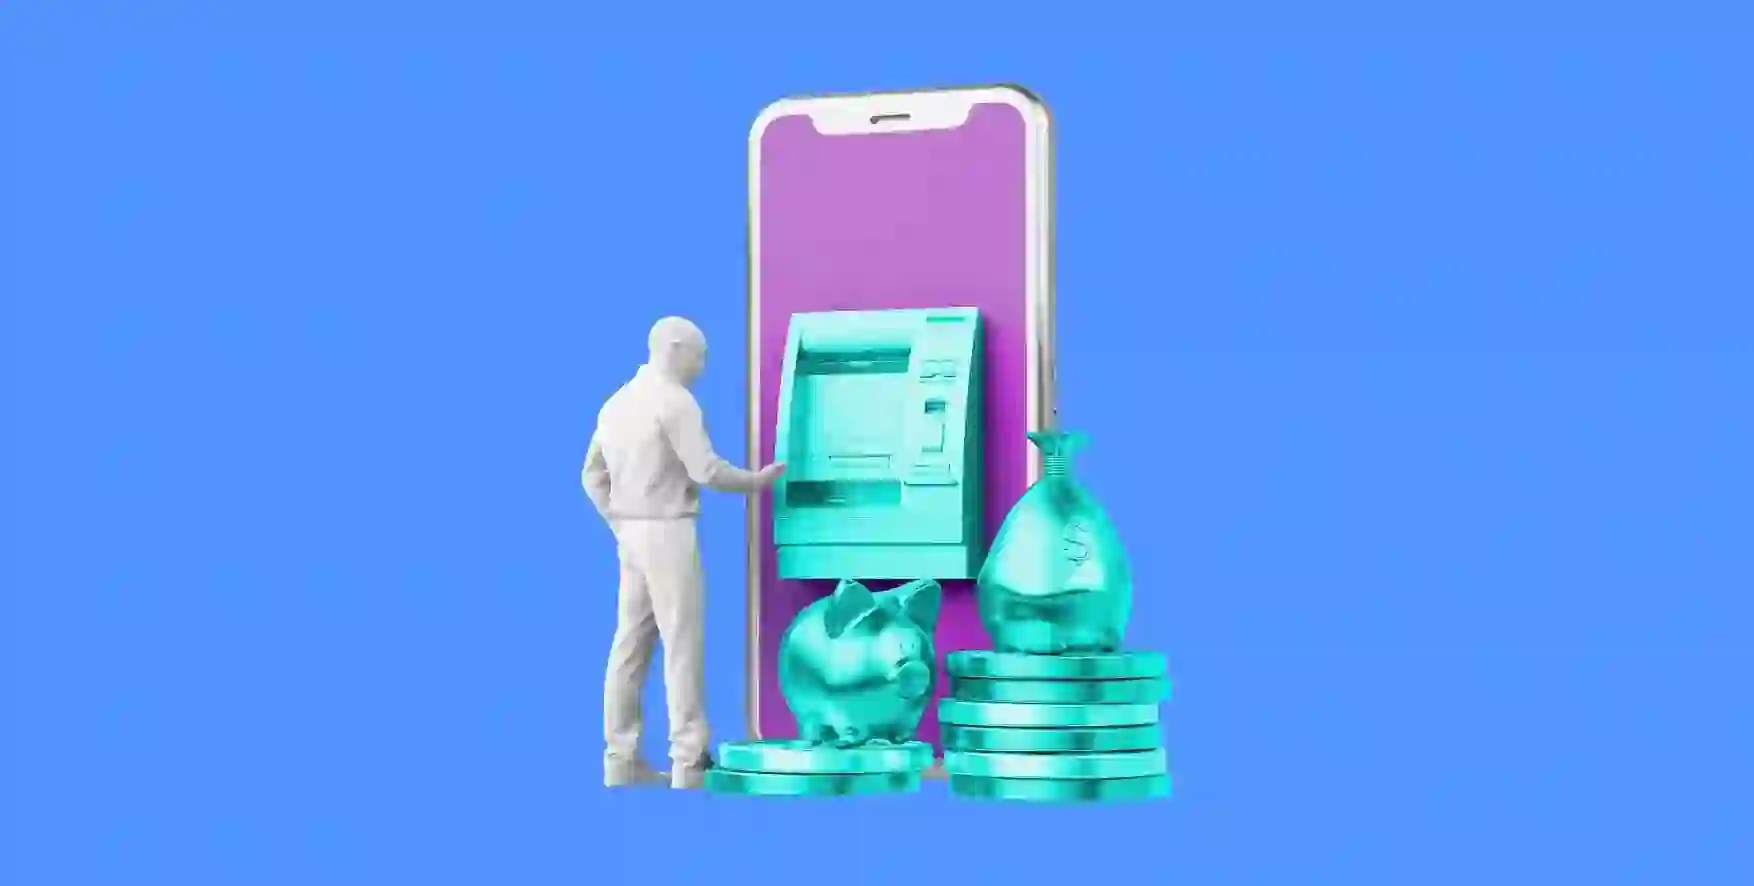 a man stands in front of an ATM built into a smartphone